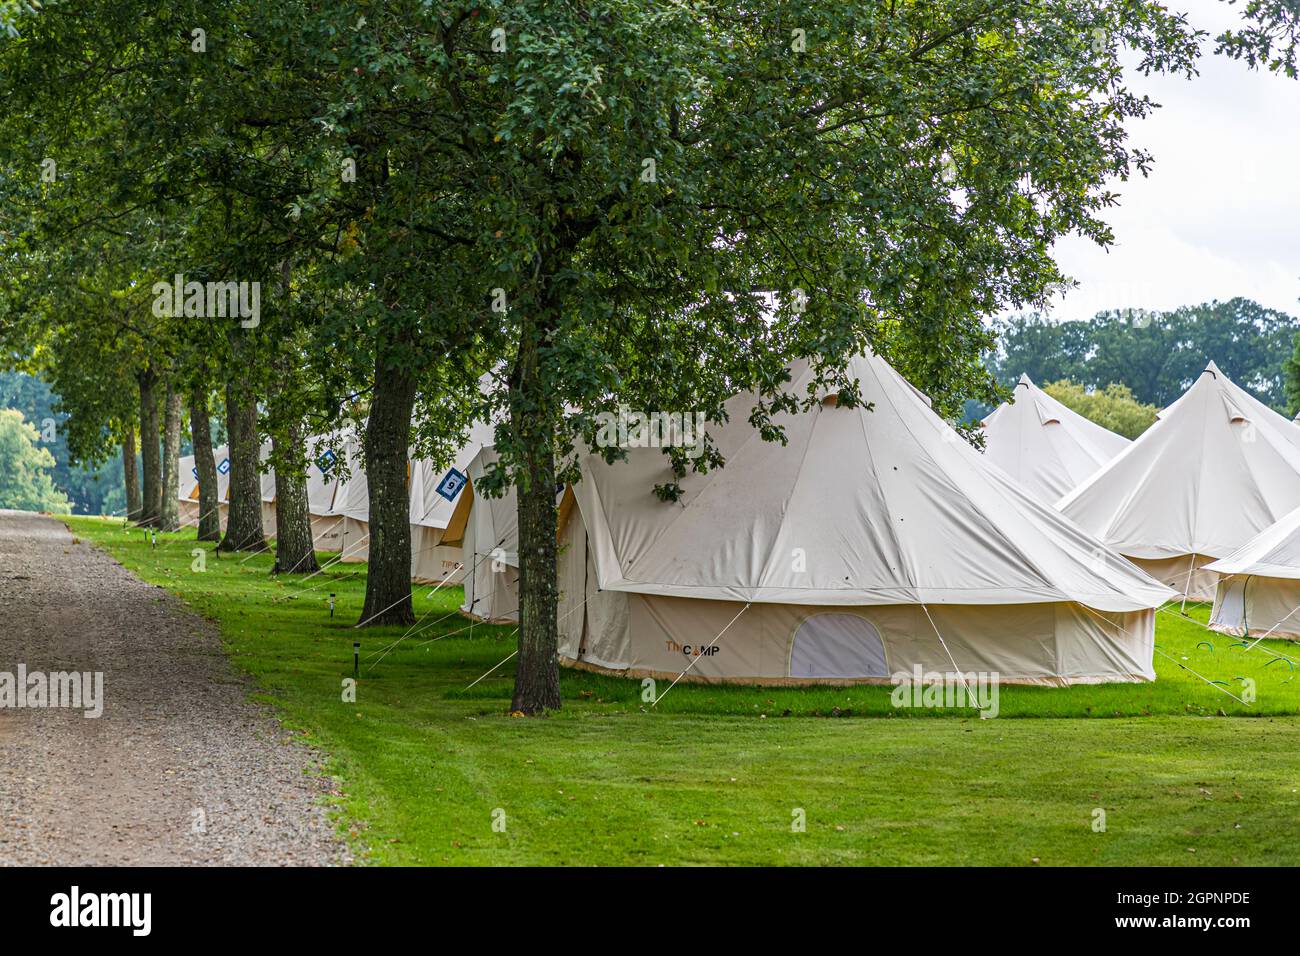 Festival in glamping tents Brahetrolleborg Castle Skov and Landbrug near Faaborg-Midtfyn, Denmark. The audience has been invited by three big Danish Companies. The had no access to the three closed